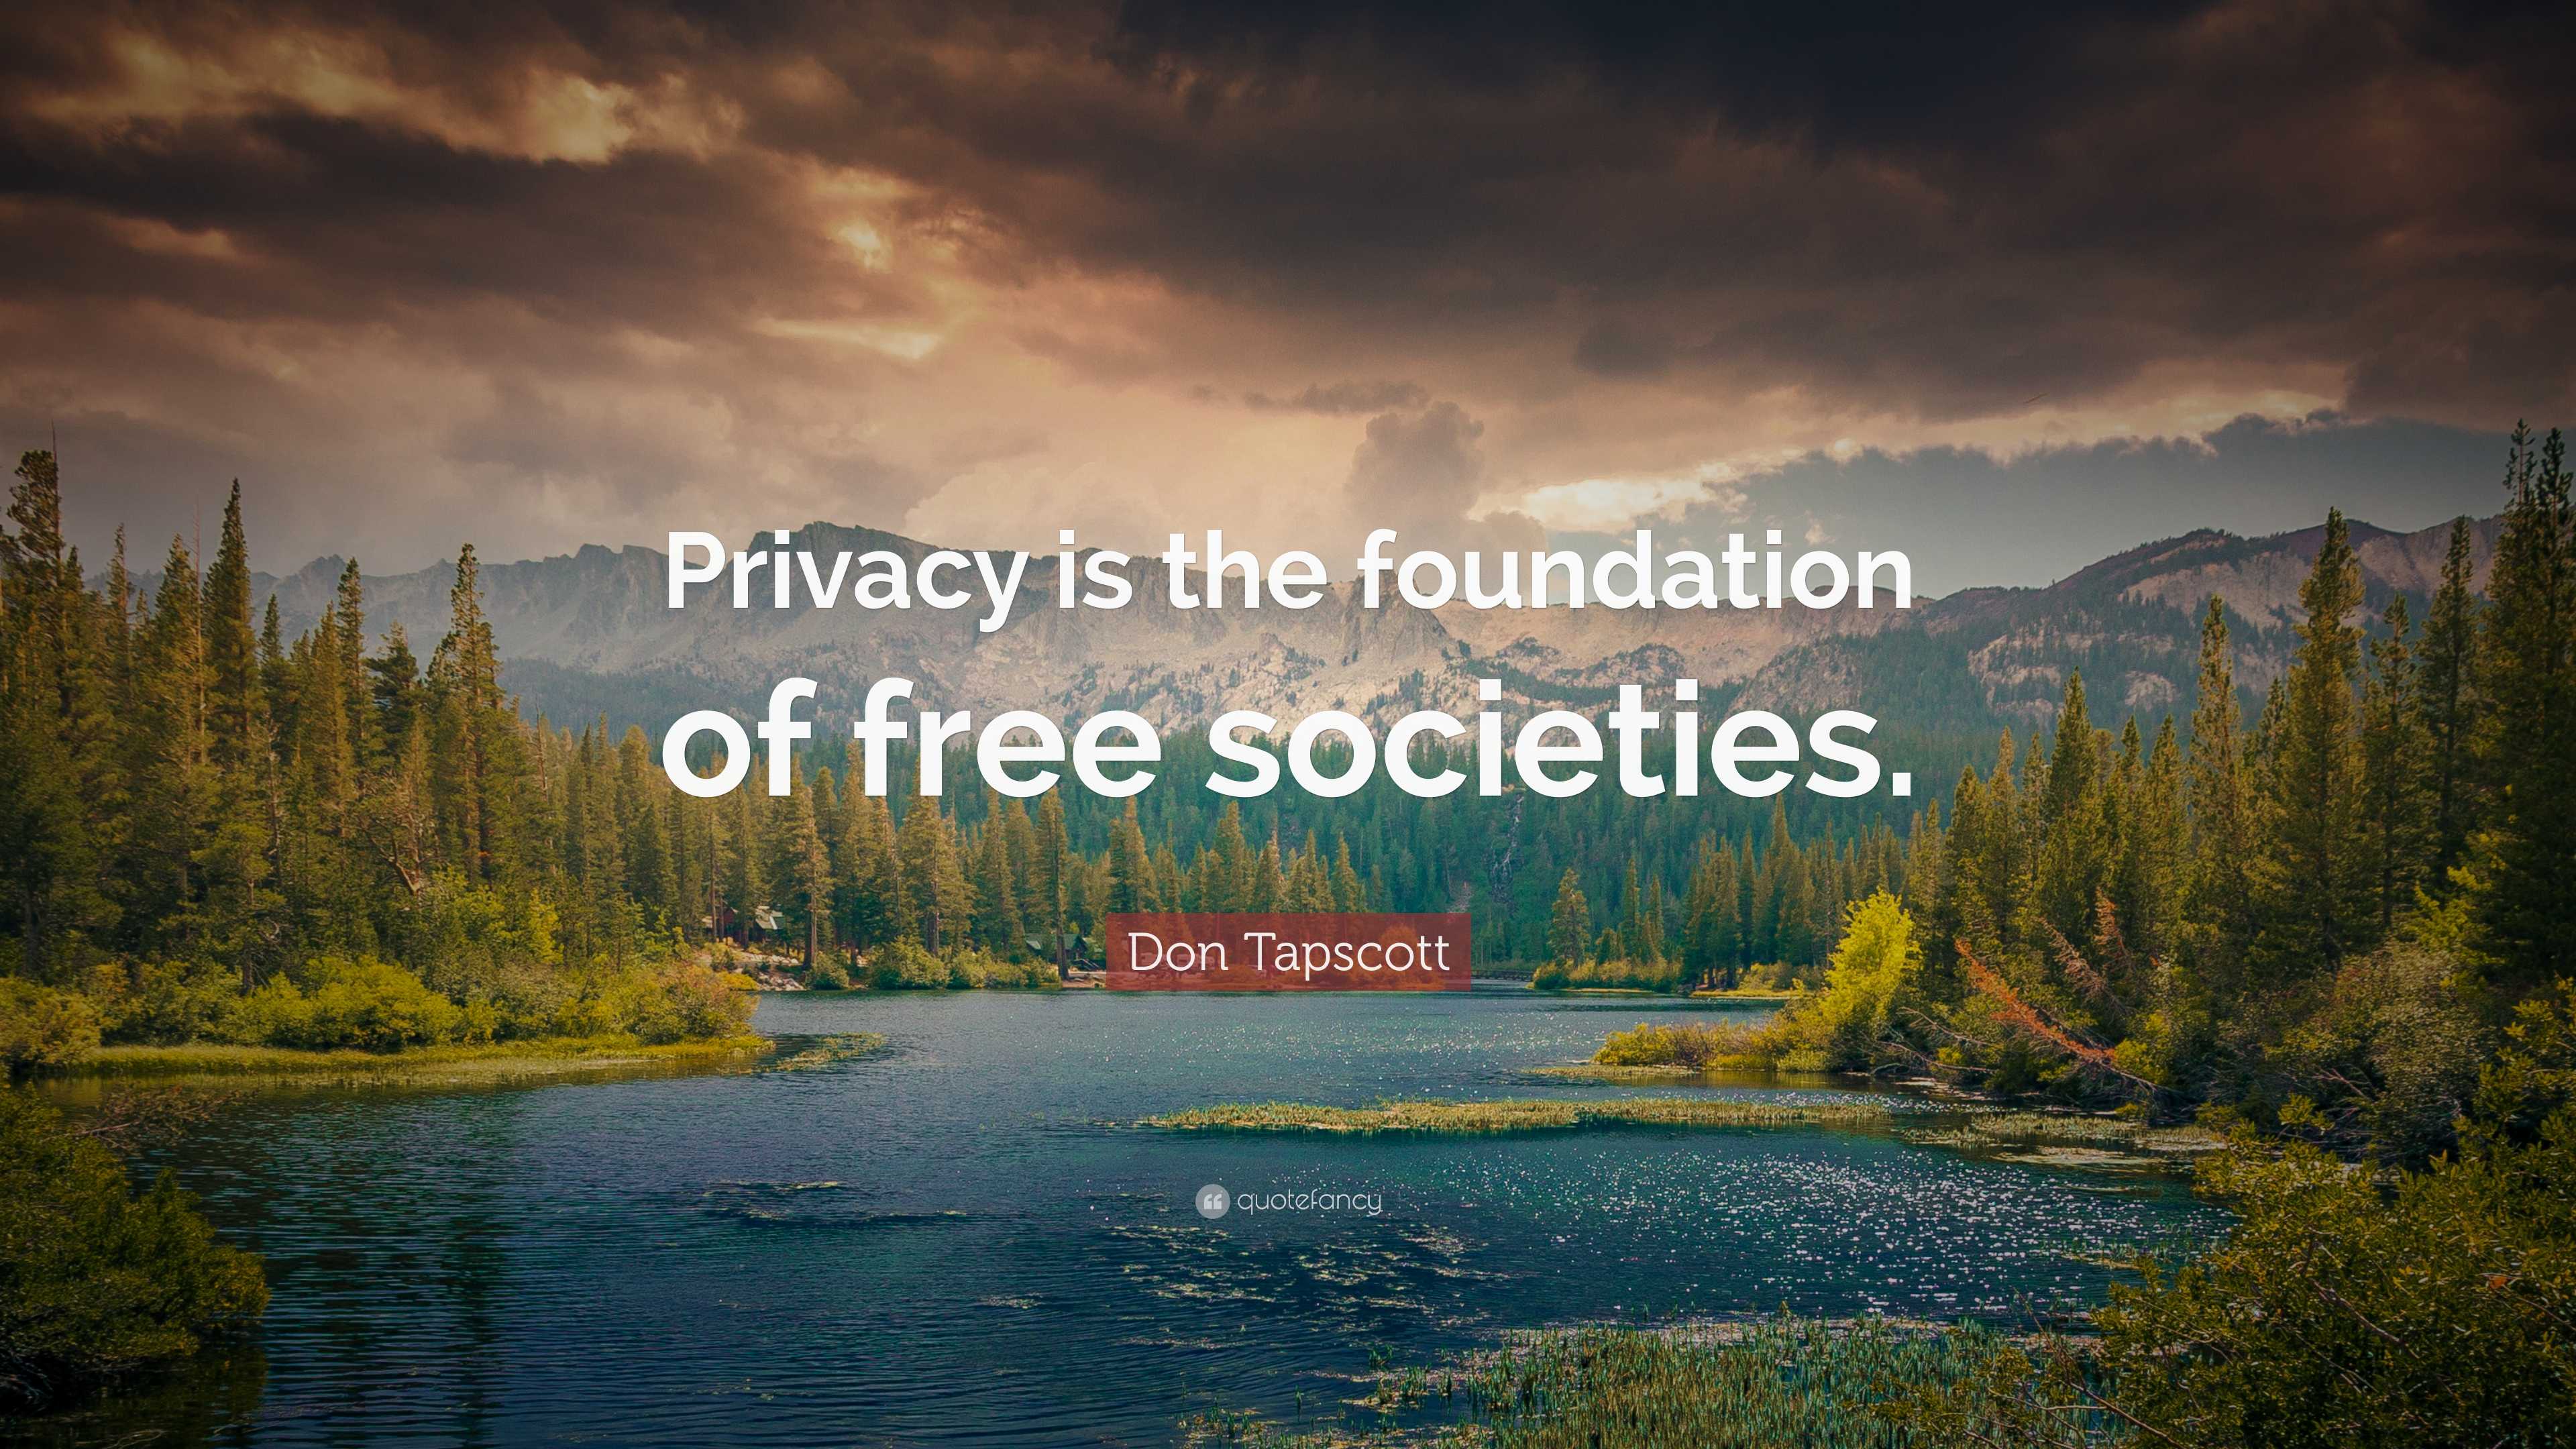 https://quotefancy.com/media/wallpaper/3840x2160/7875667-Don-Tapscott-Quote-Privacy-is-the-foundation-of-free-societies.jpg